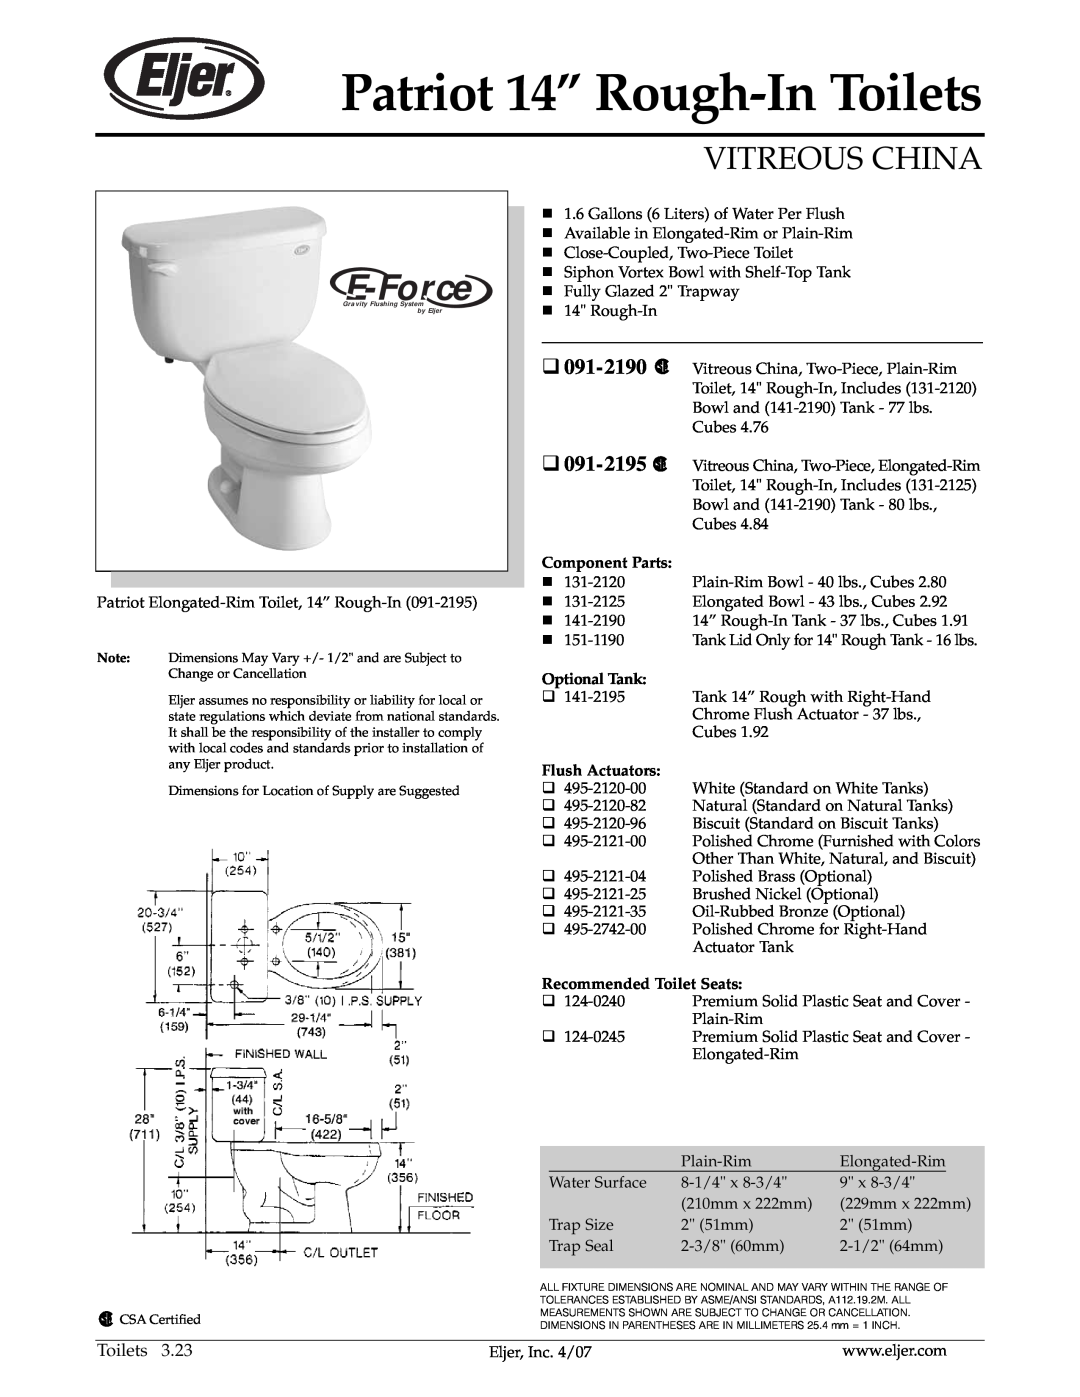 American Standard 091-2195 dimensions Patriot 14” Rough-InToilets, E-Force, Vitreous China, 091-2190, Component Parts 